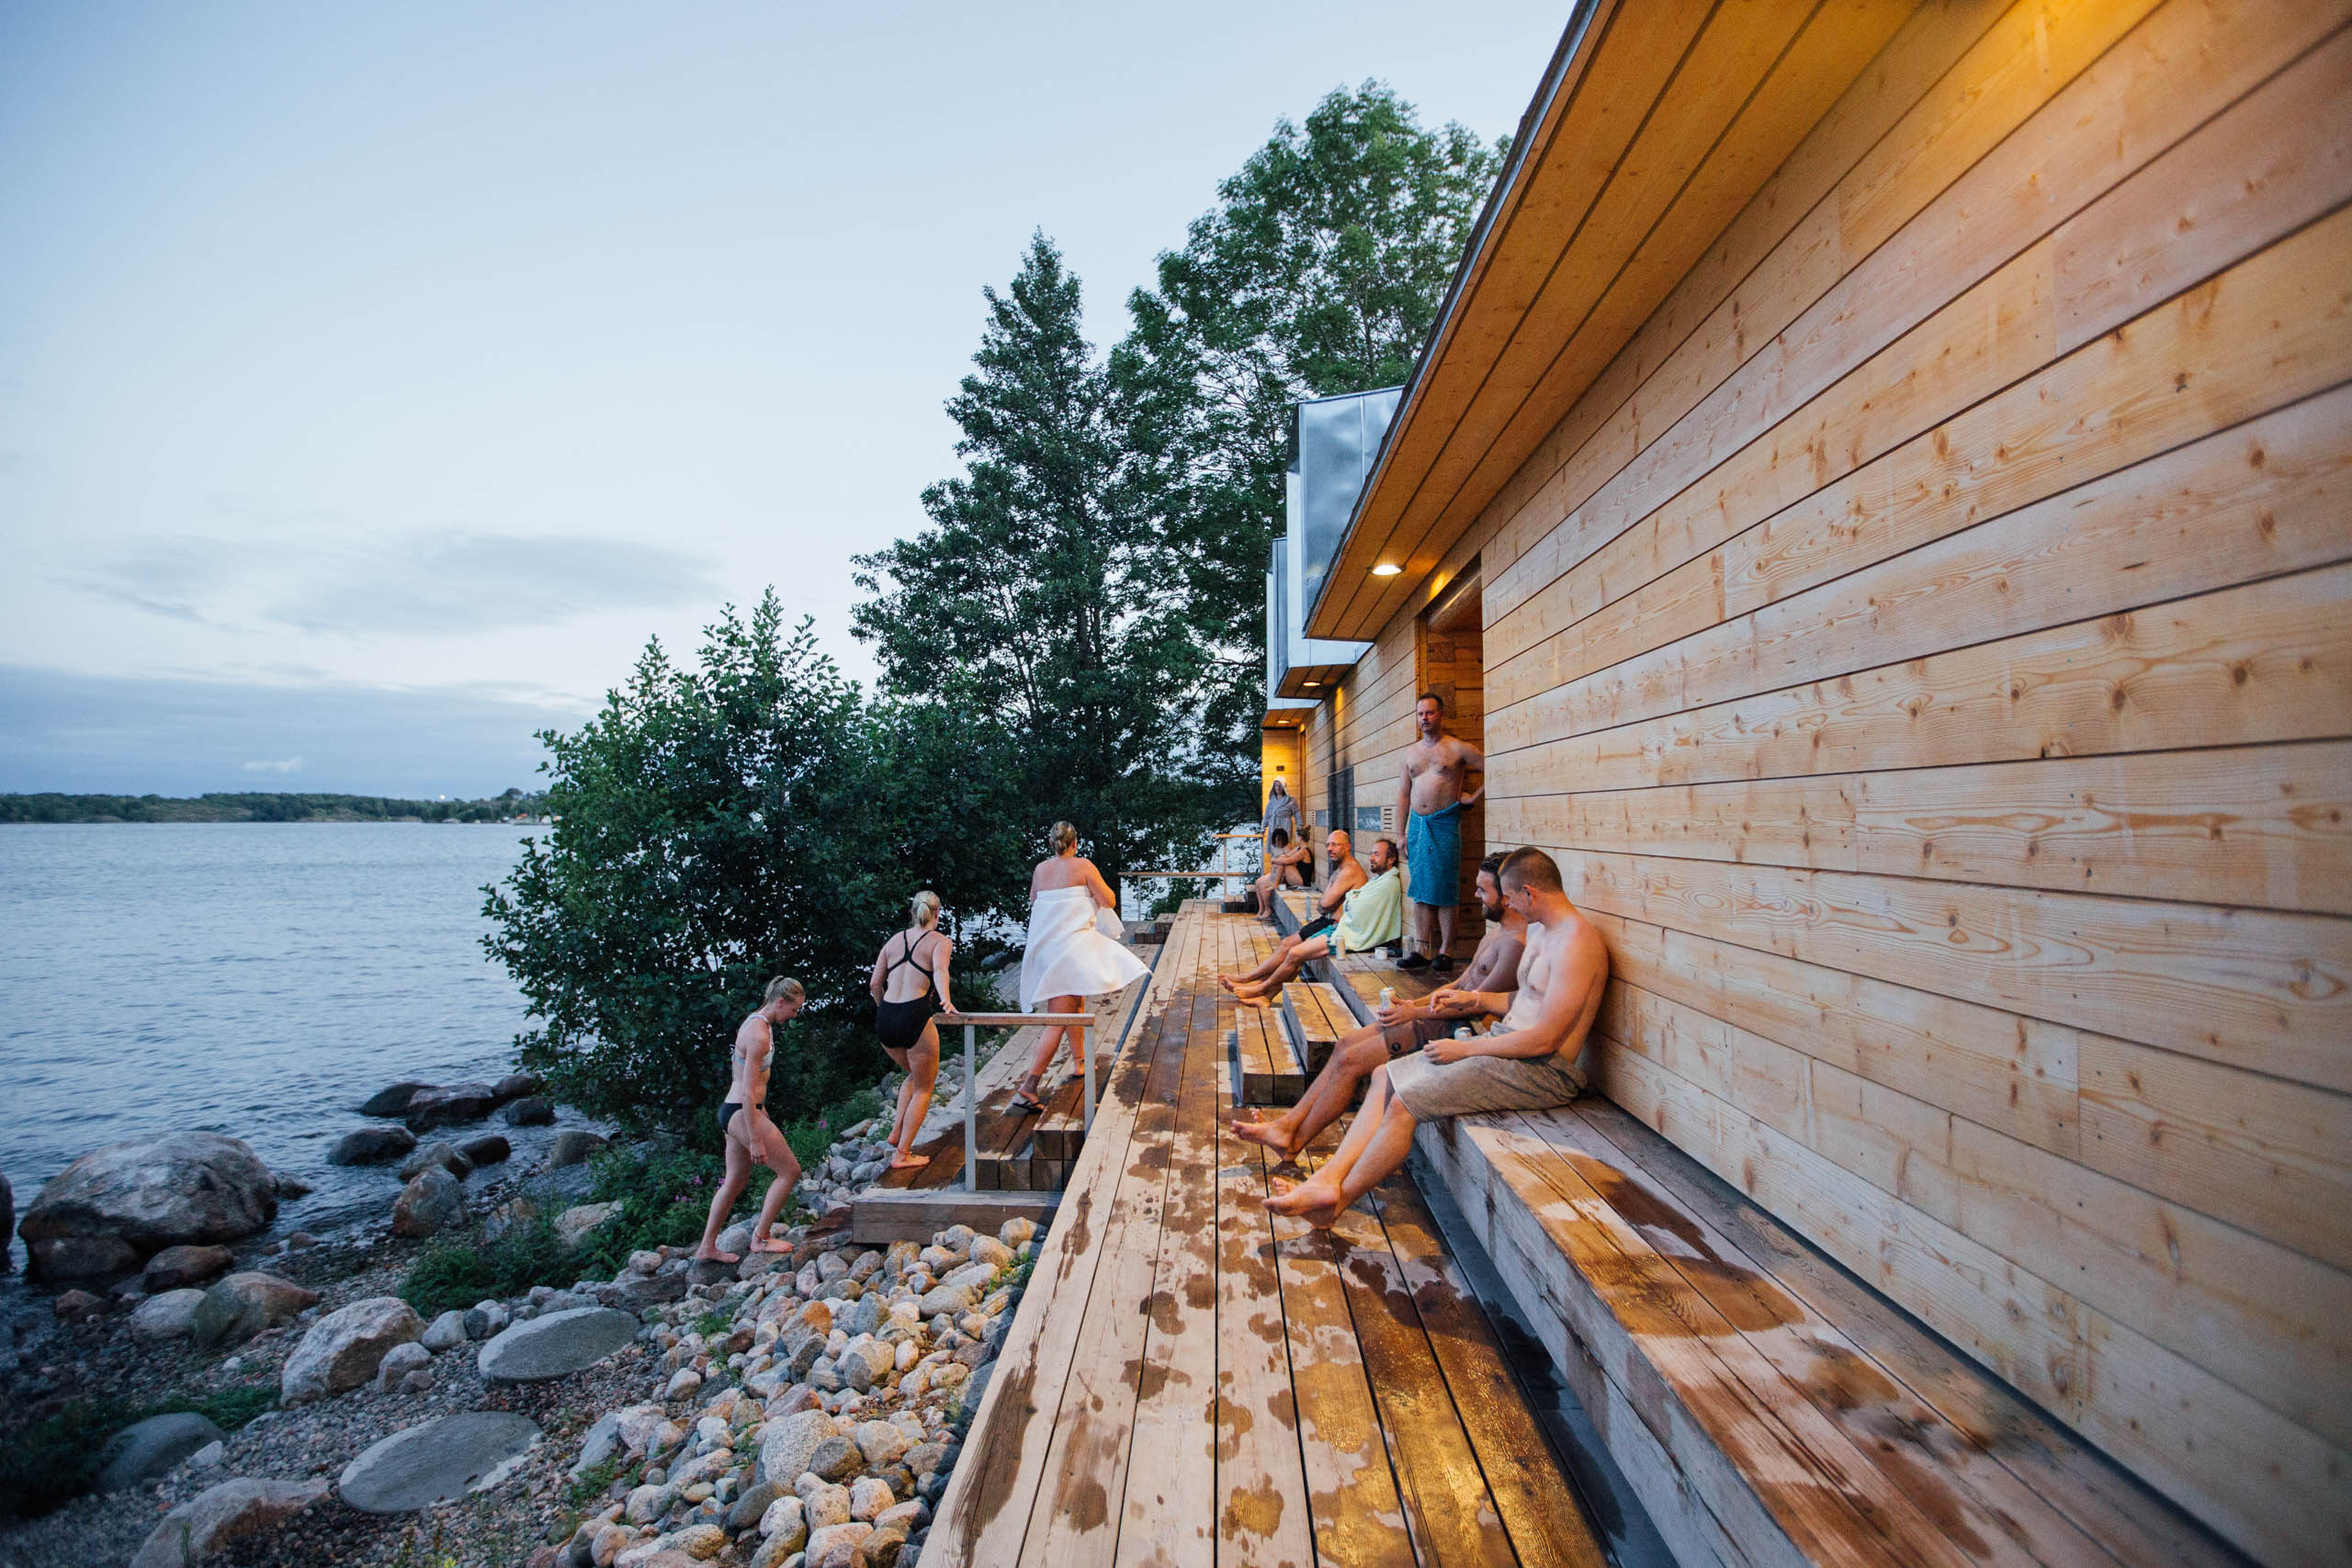 People cooling off on the porch of a sauna be the Baltic Sea